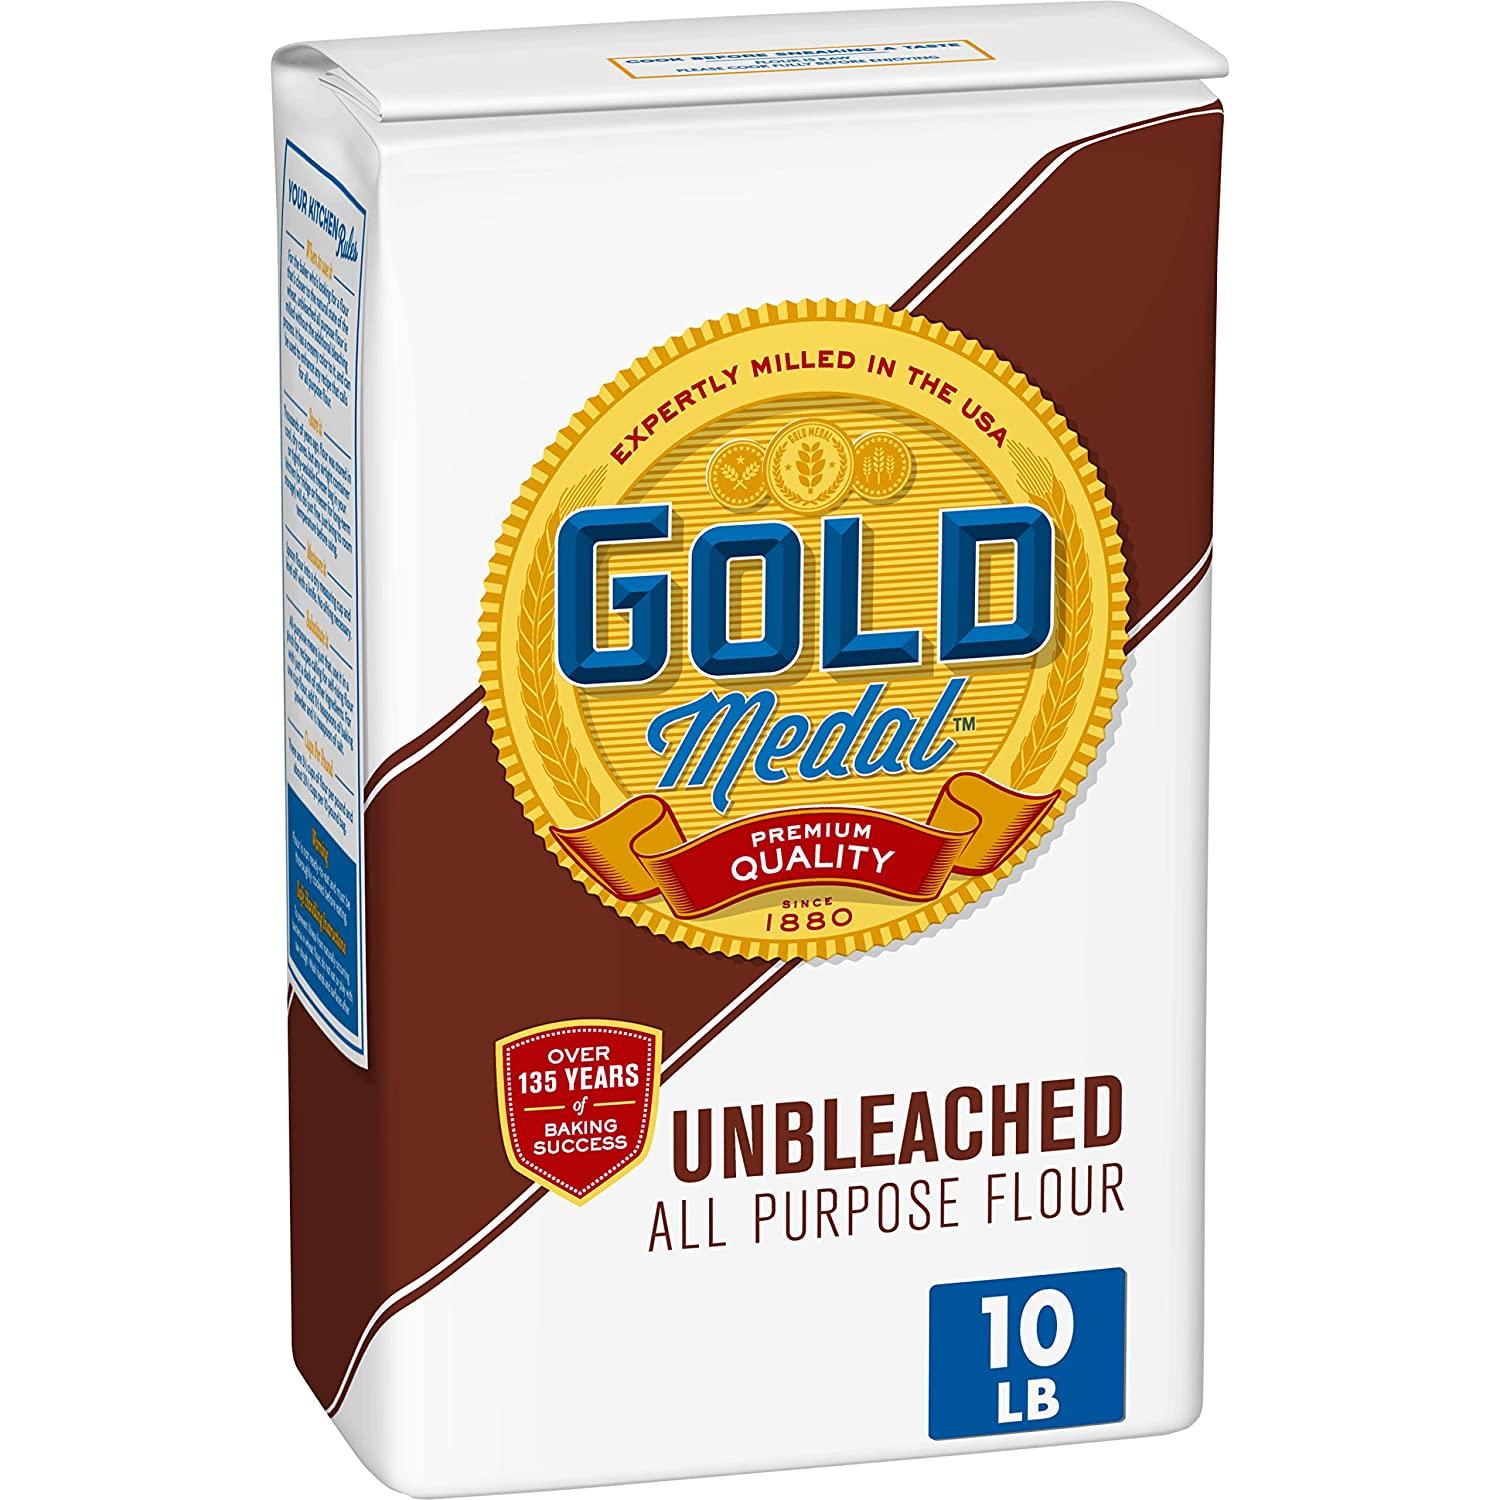 Gold Medal Unbleached All Purpose Flour for $4.82 Shipped